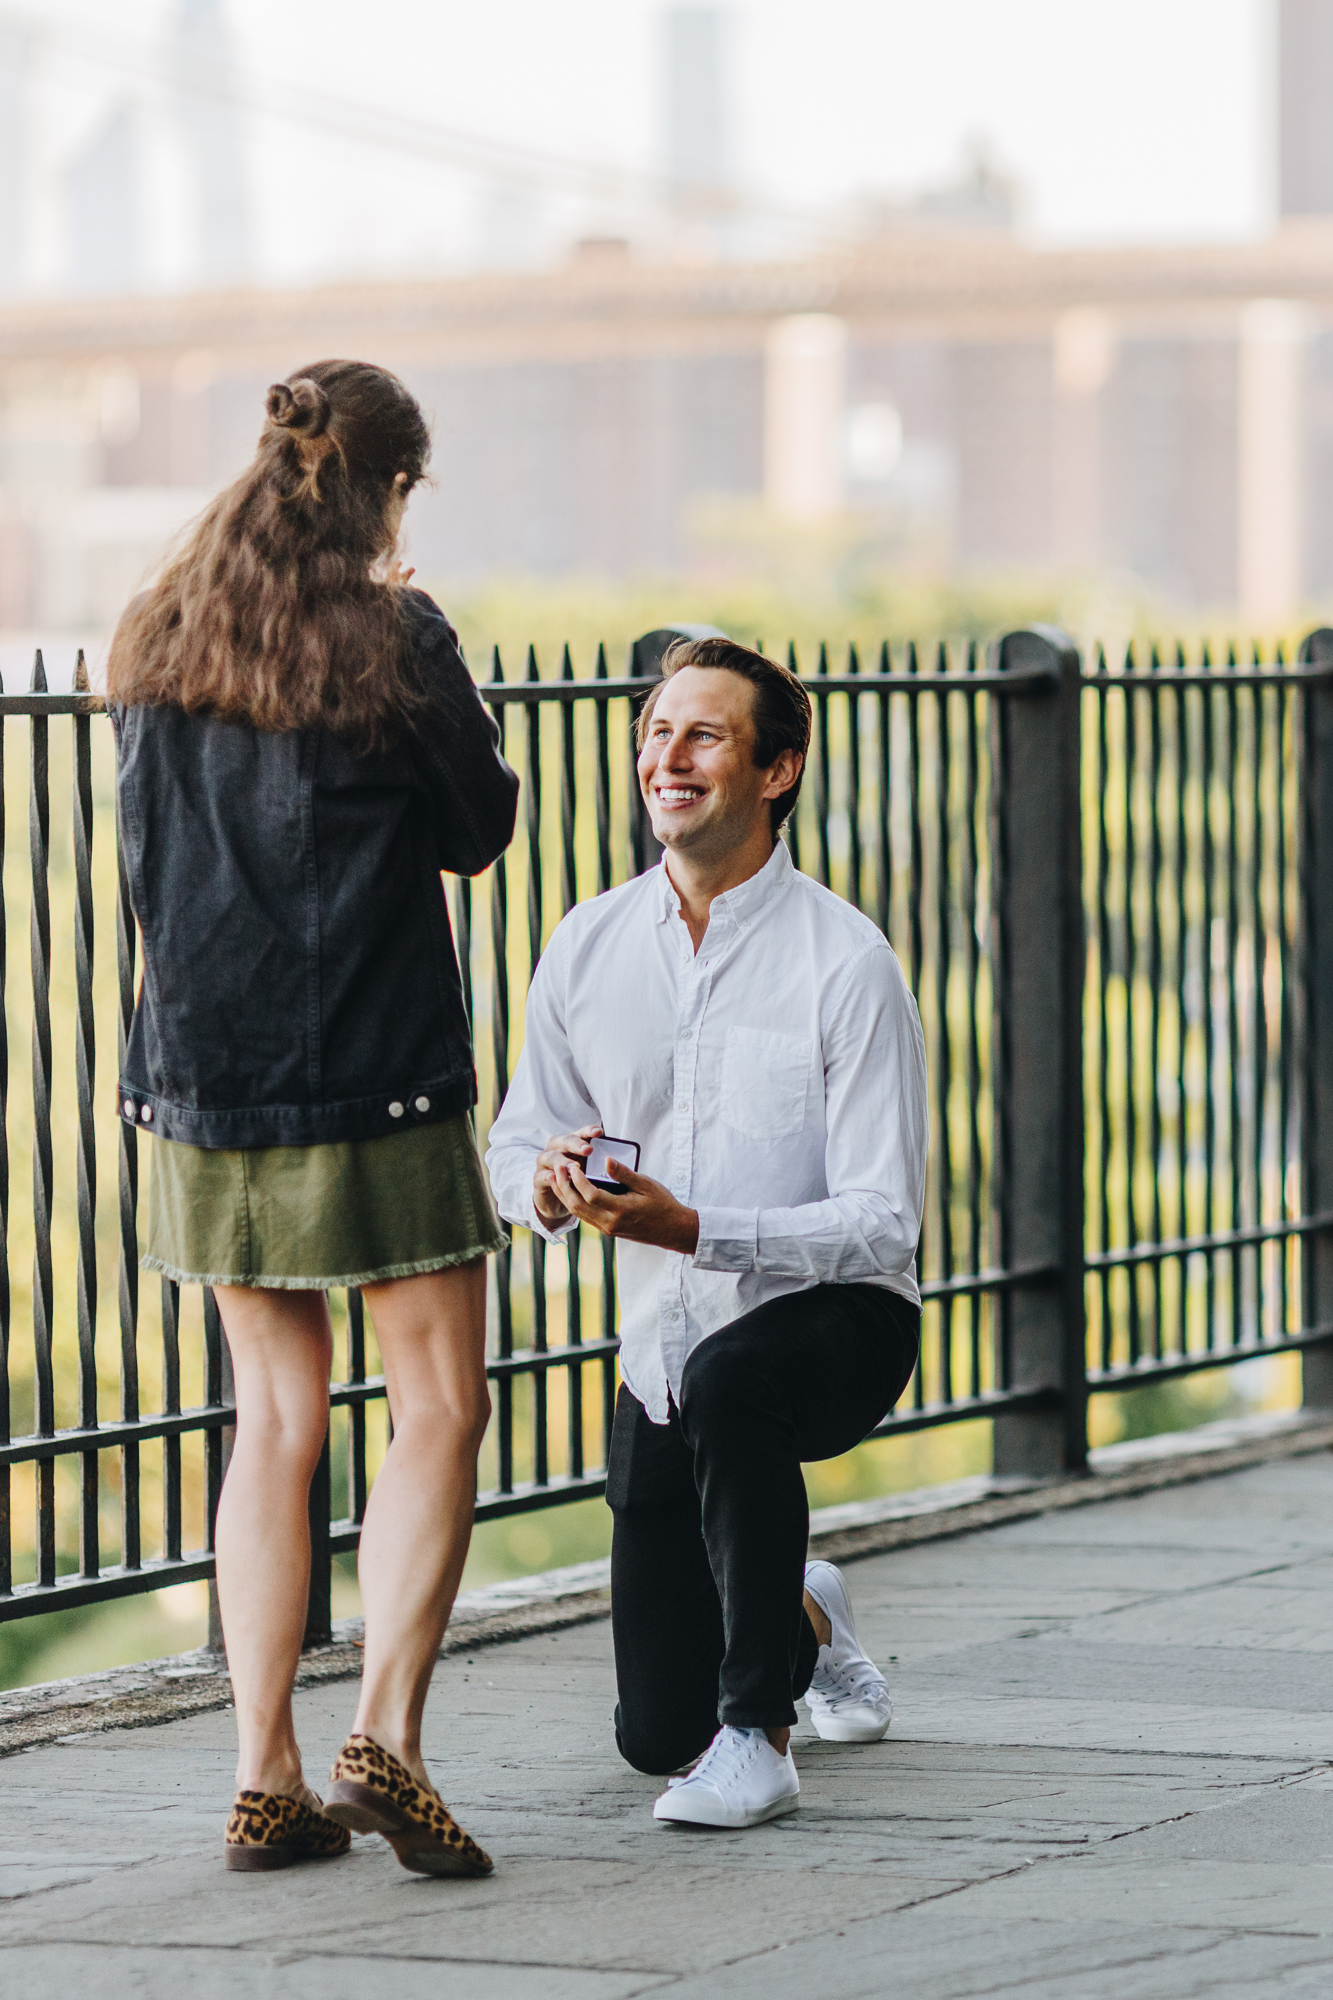 The perfect Places to Propose in NYC